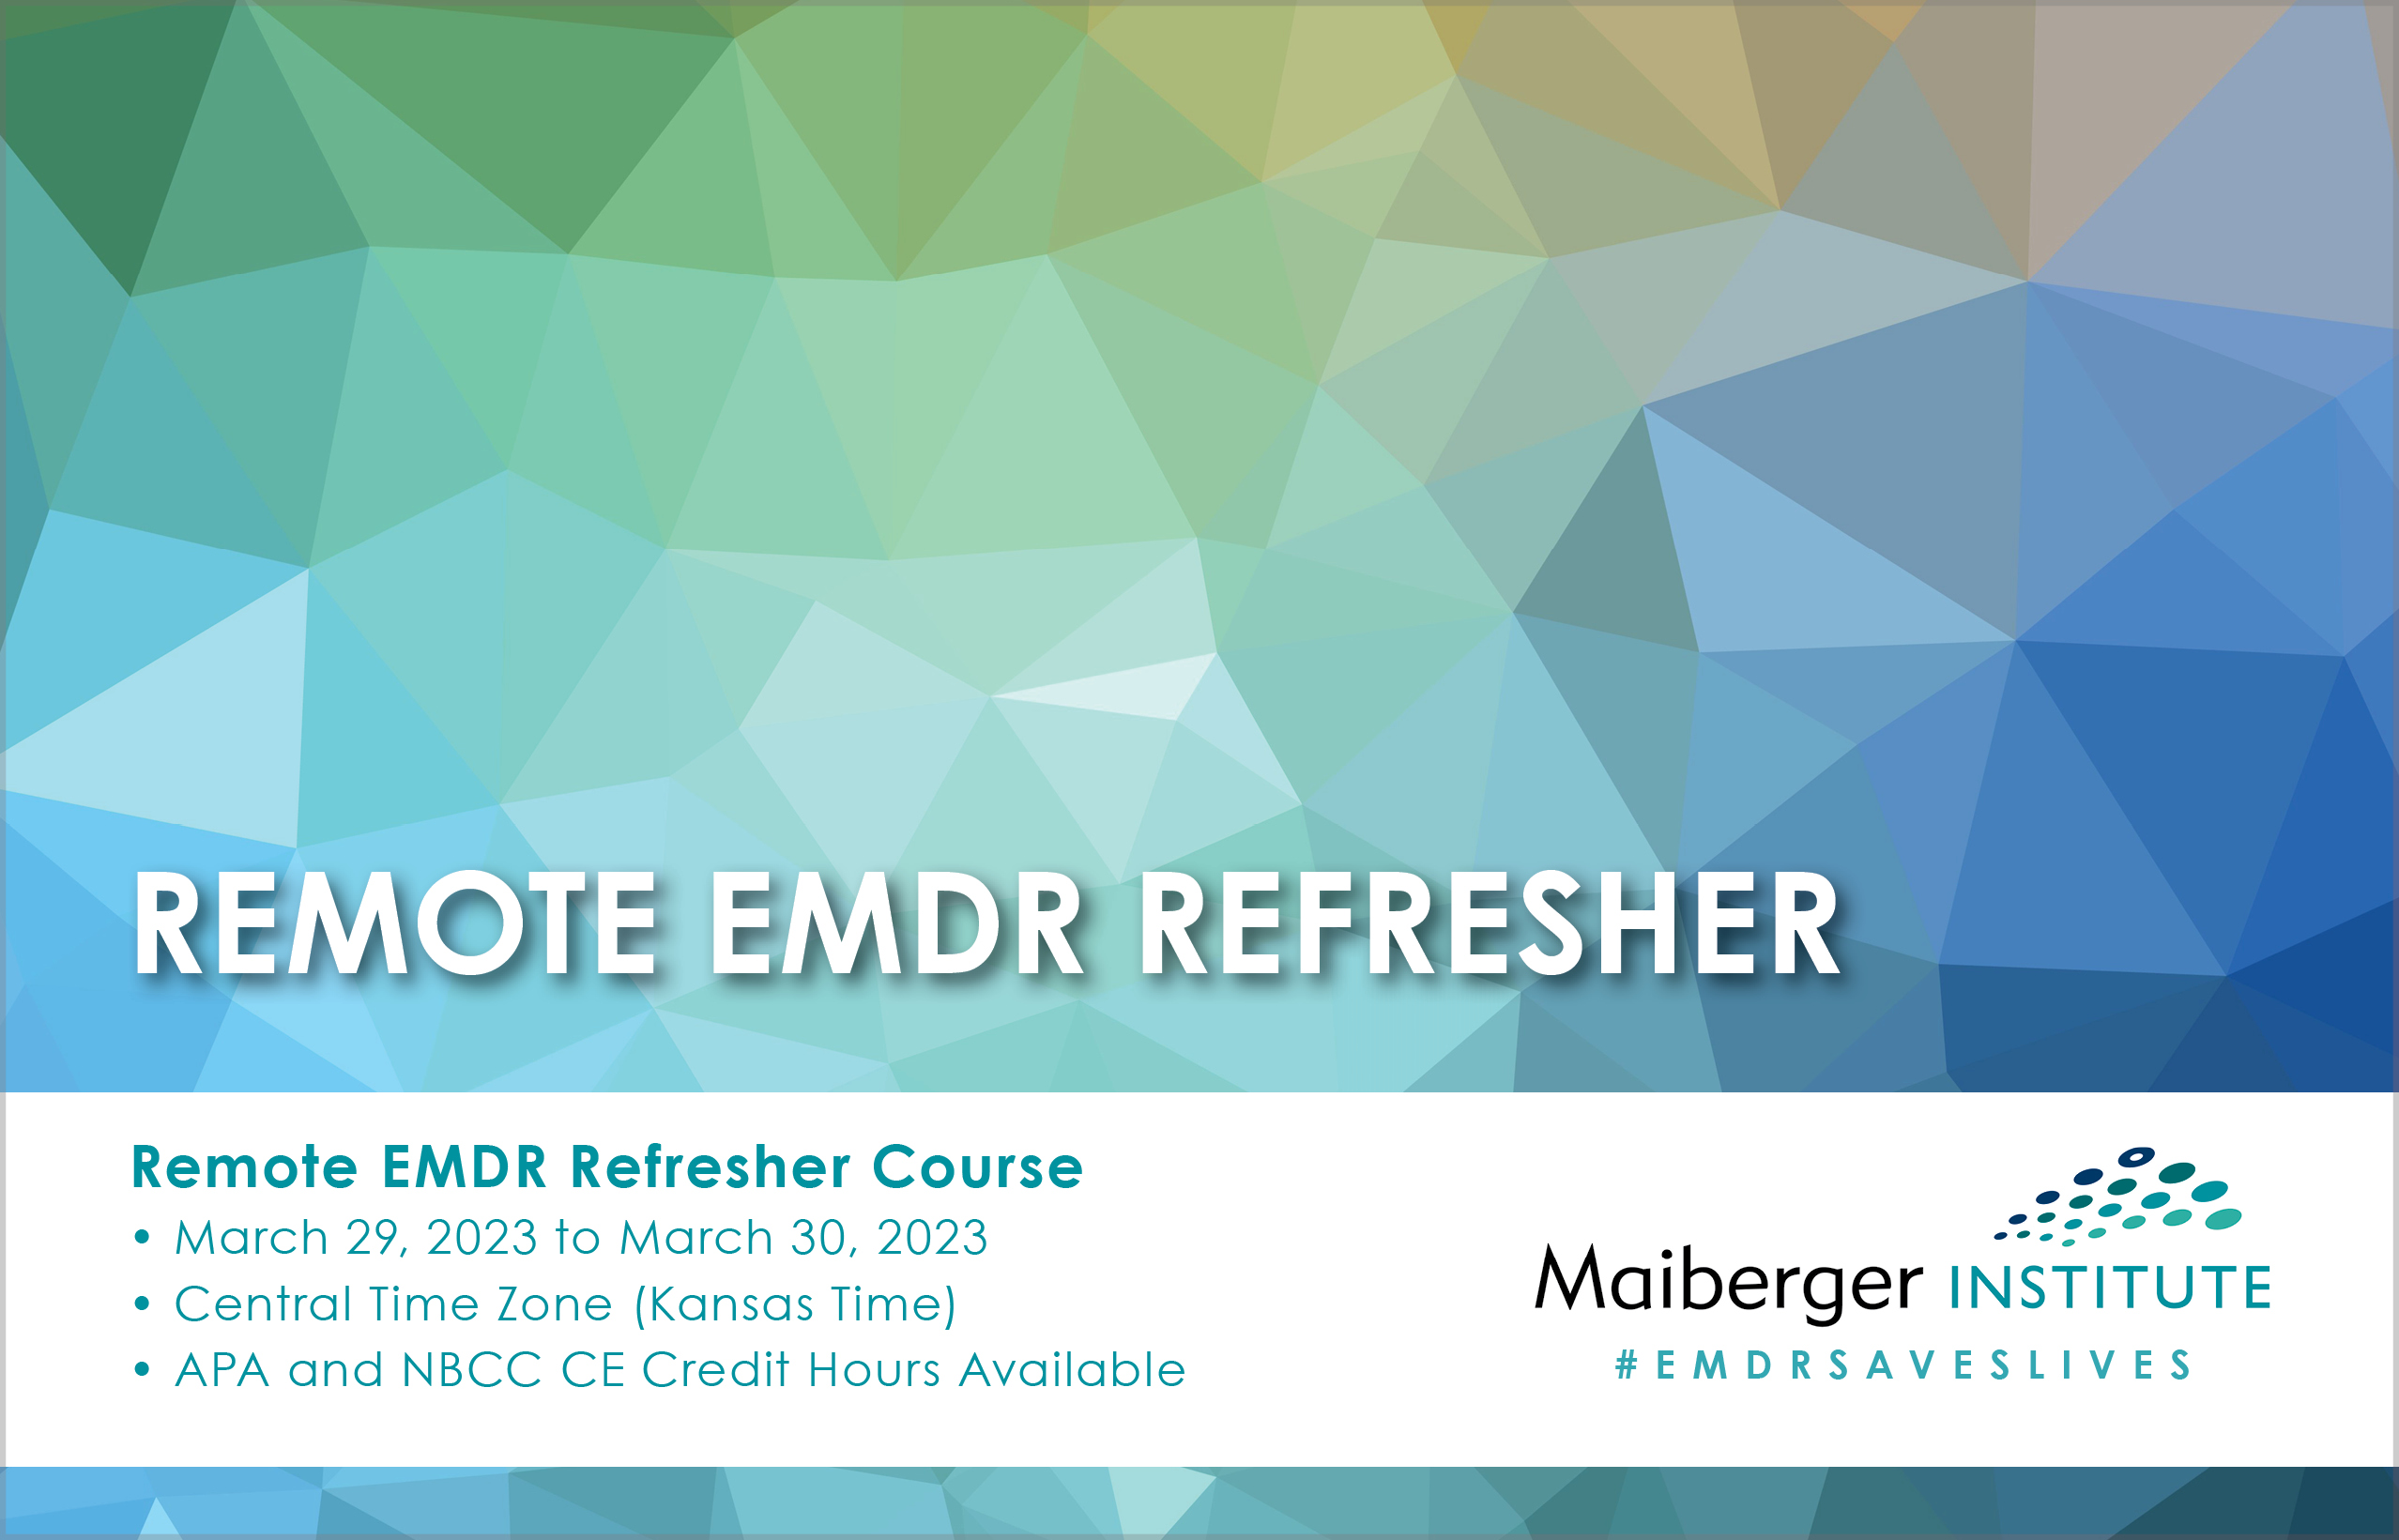 Remote EMDR Refresher Course - March 29, 2023 to March 30, 2023 - Central Time Zone (Kansas Time) - Maiberger Institute - Event Page